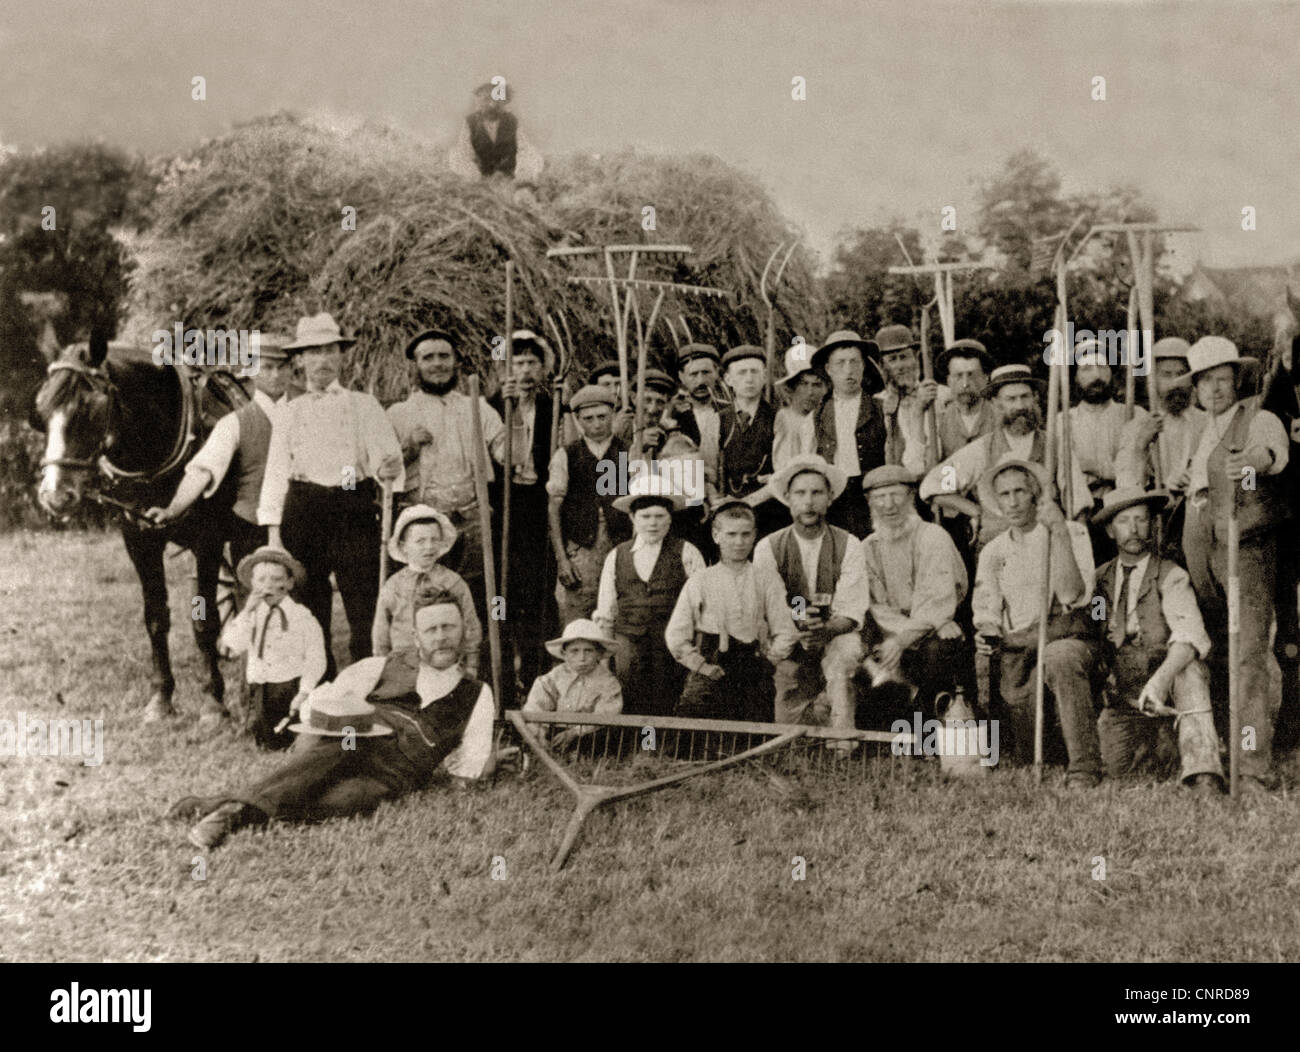 A vintage harvest or hay making image from a farm in Sussex in 1901. There are twenty-eight members of this harvesting team Stock Photo